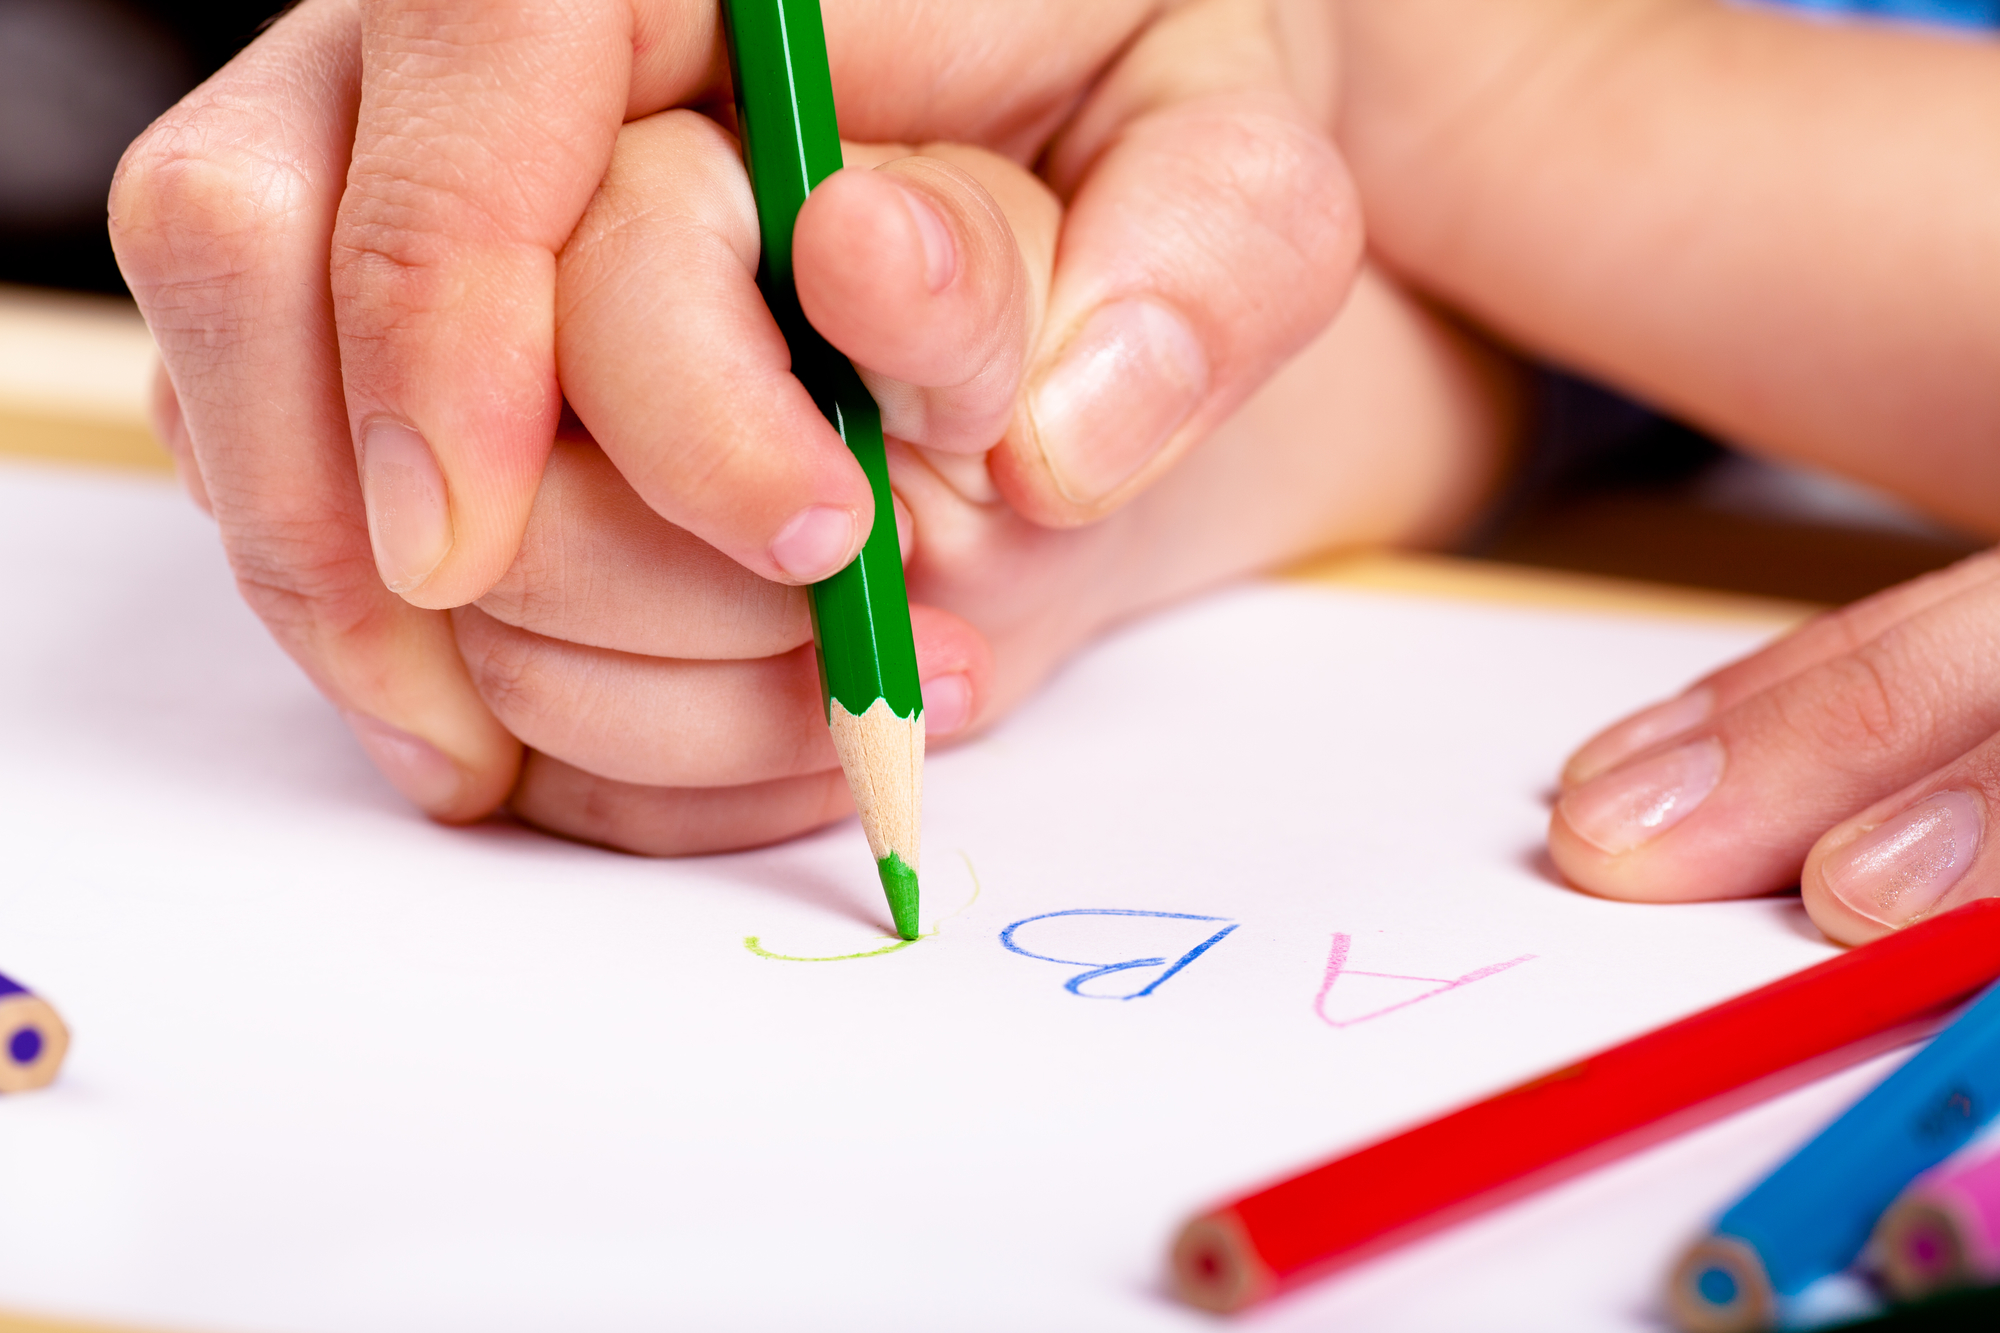 Tips for Reducing Struggles with Writing Utensils